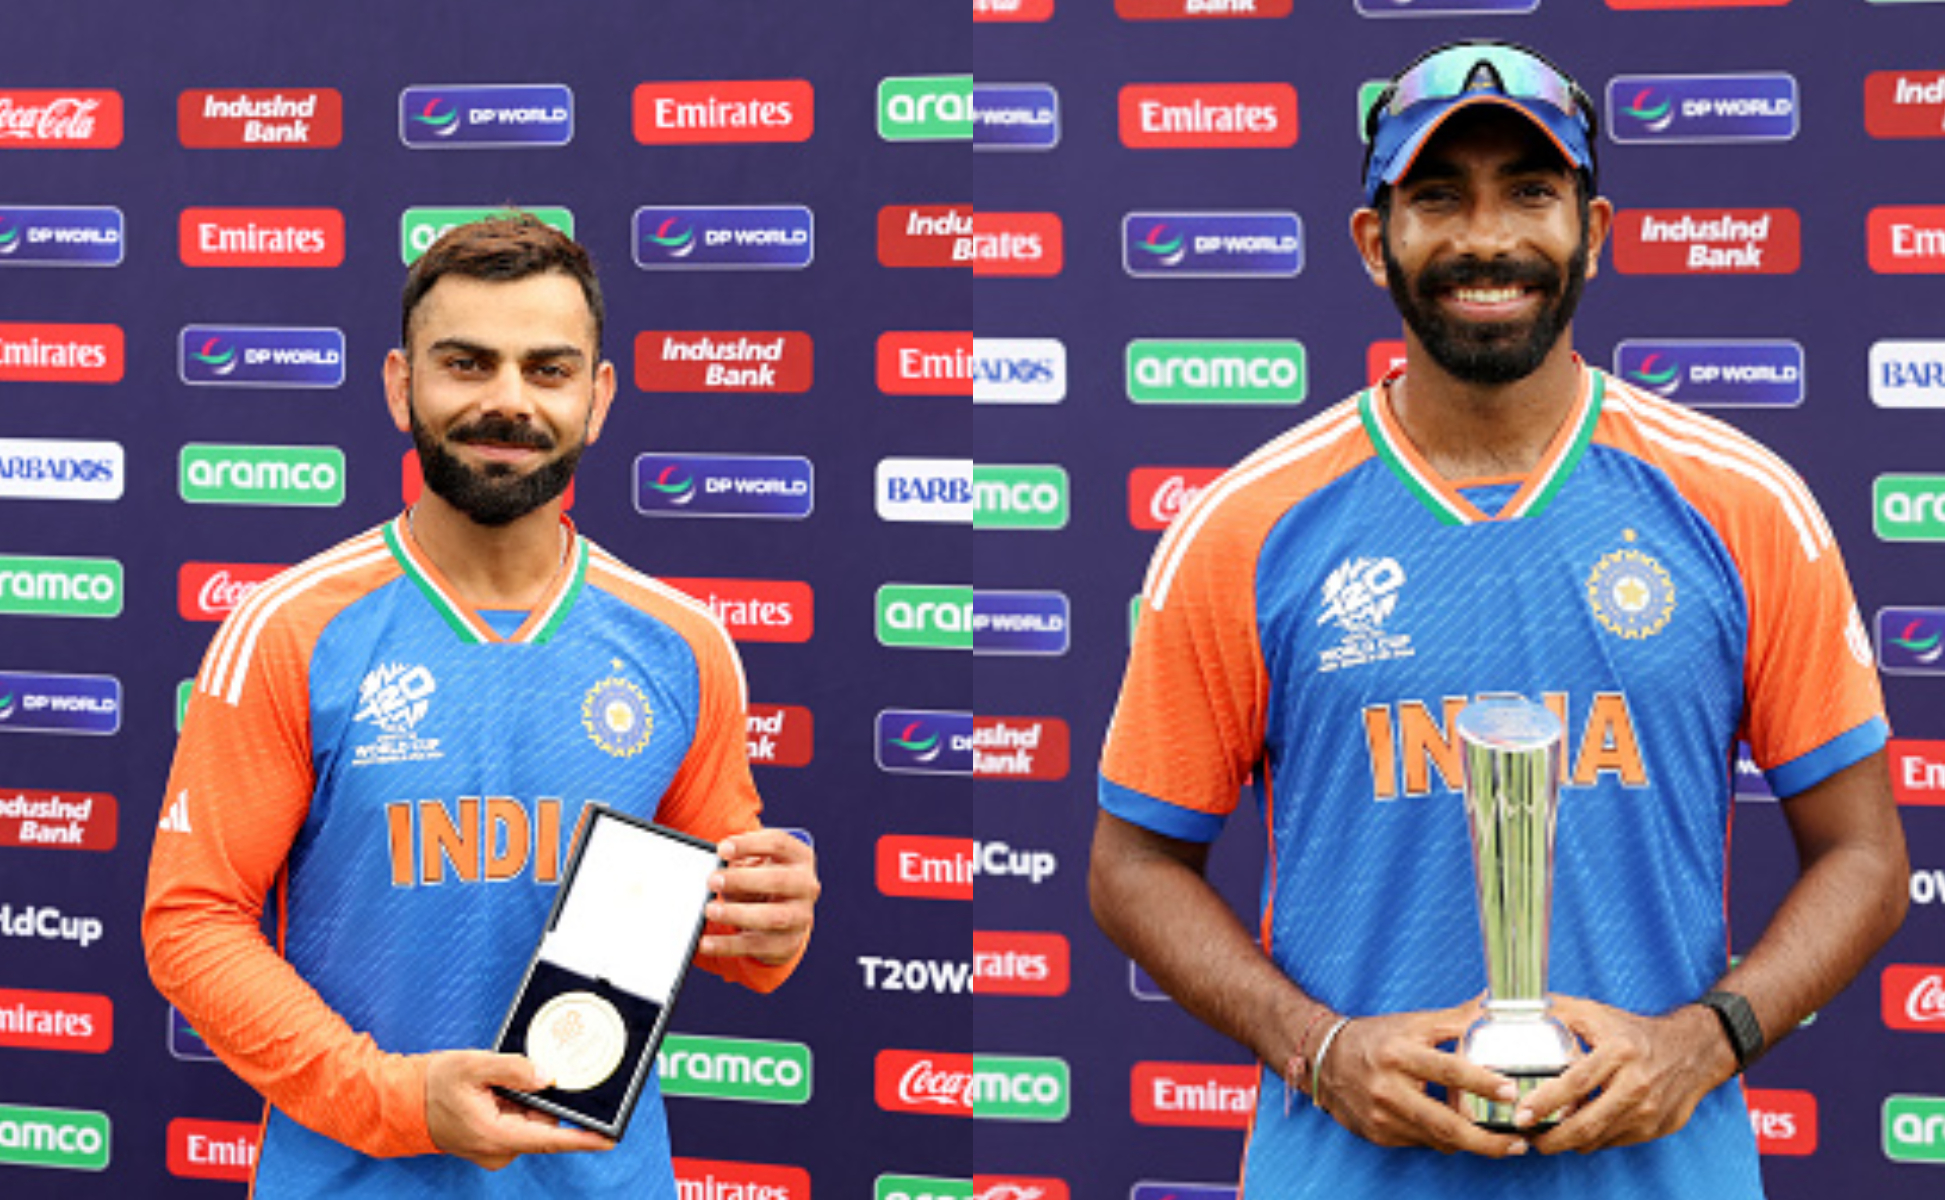 Virat Kohli was named Player of the Final and Jasprit Bumrah got Player of the tournament | Getty